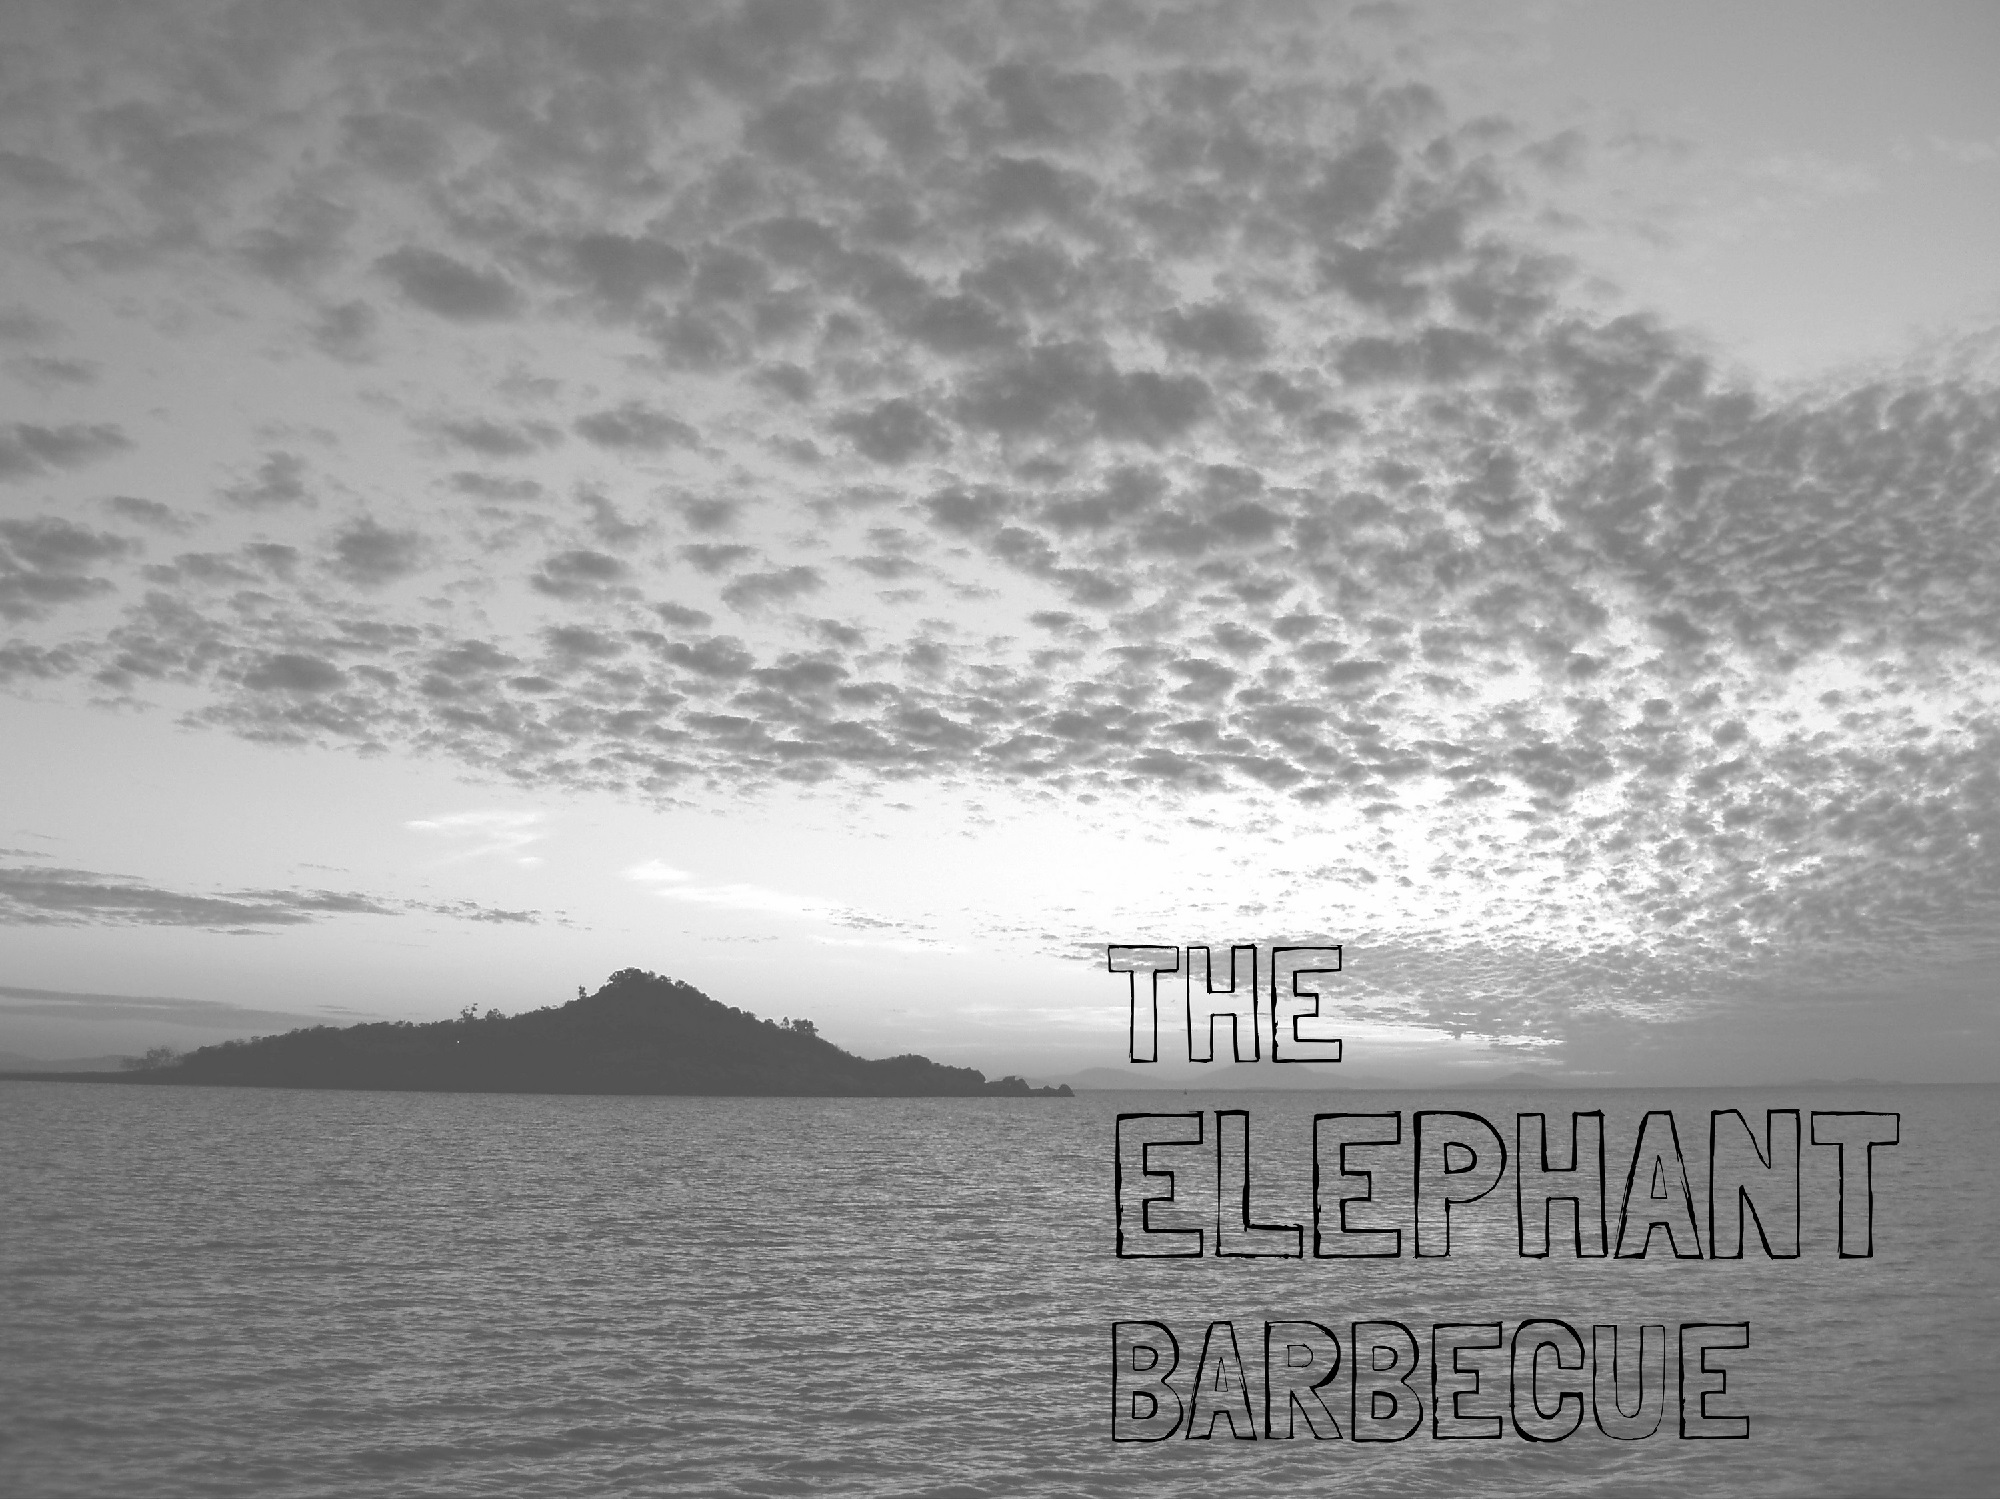 Episode 47 - The Elephant Barbecue